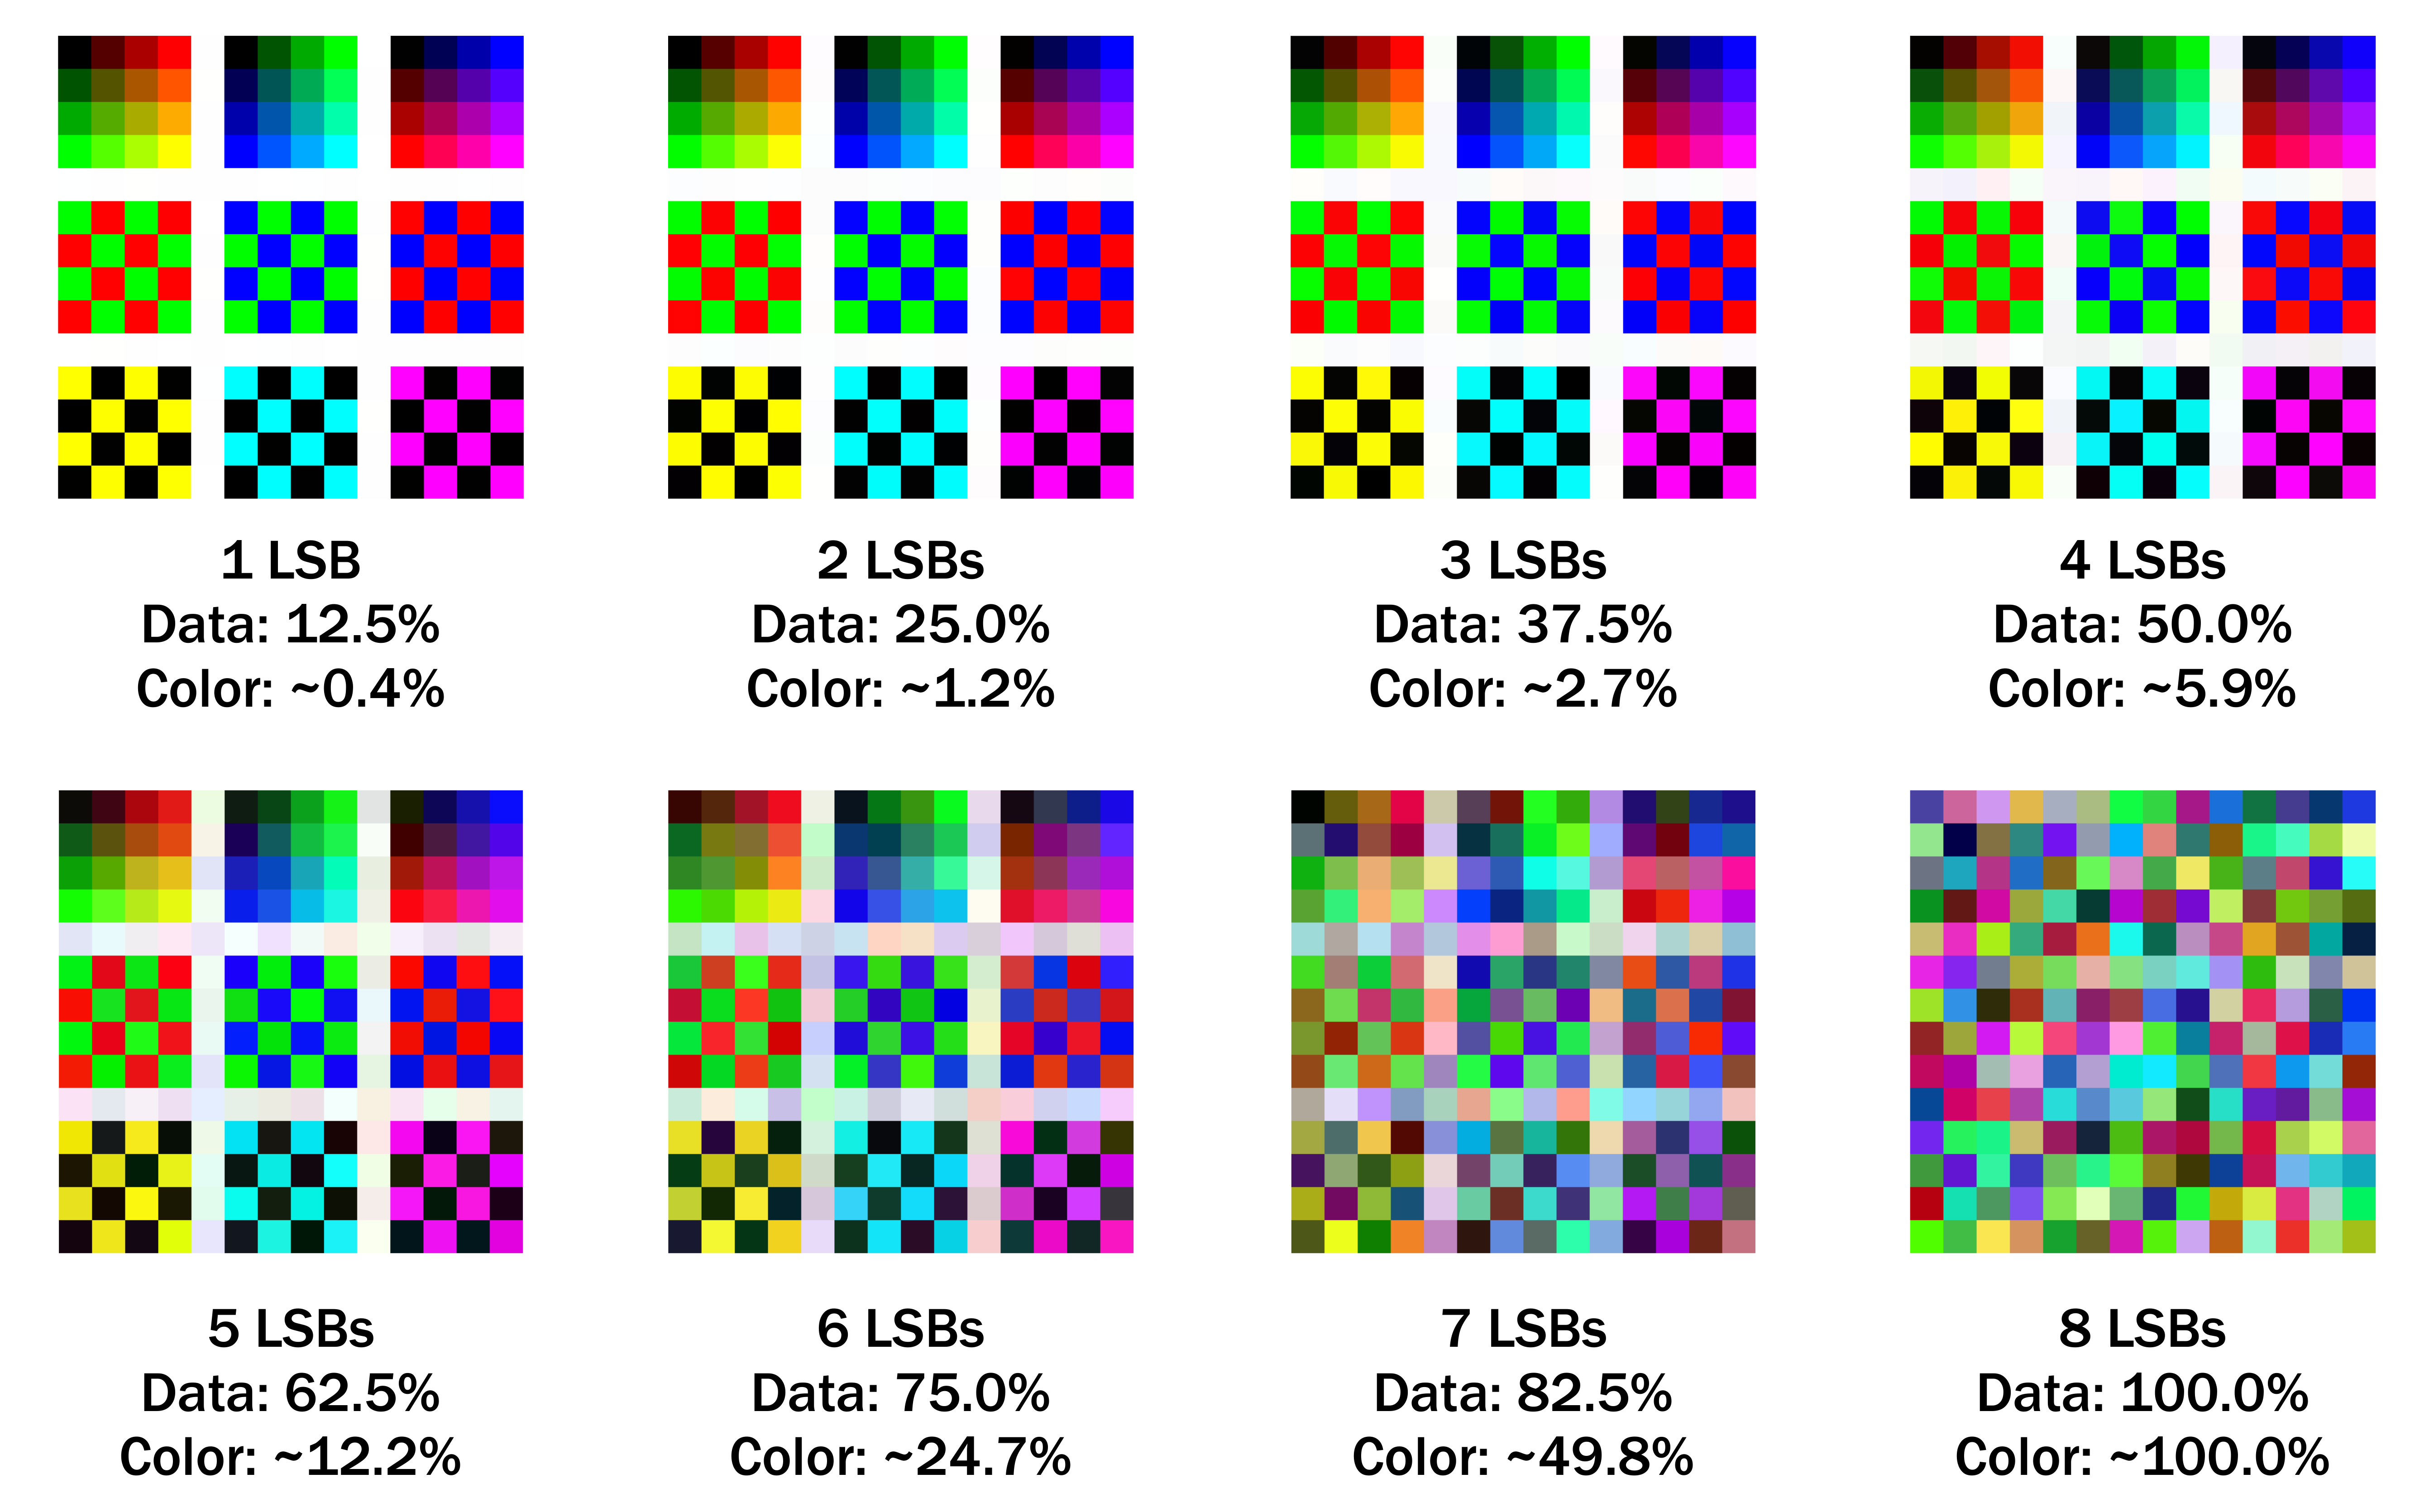 A grid of eight test images that get increasingly noisy as the number of LSBs increase.
1 LSB uses 12.5% of data and ~0.4% of color. 2 LSBs use 25.0% of data and ~1.2% of color.
3 LSBs use 37.5% of data and ~2.7% of color. 4 LSBs use 50.0% of data and ~5.9% of color.
5 LSBs use 62.5% of data and ~12.2% of color. 6 LSBs use 75.0% of data and ~24.7% of color.
7 LSBs use 82.5% of data and ~49.8% of color. 8 LSBs use 100.0% of data and ~100.0% of color.